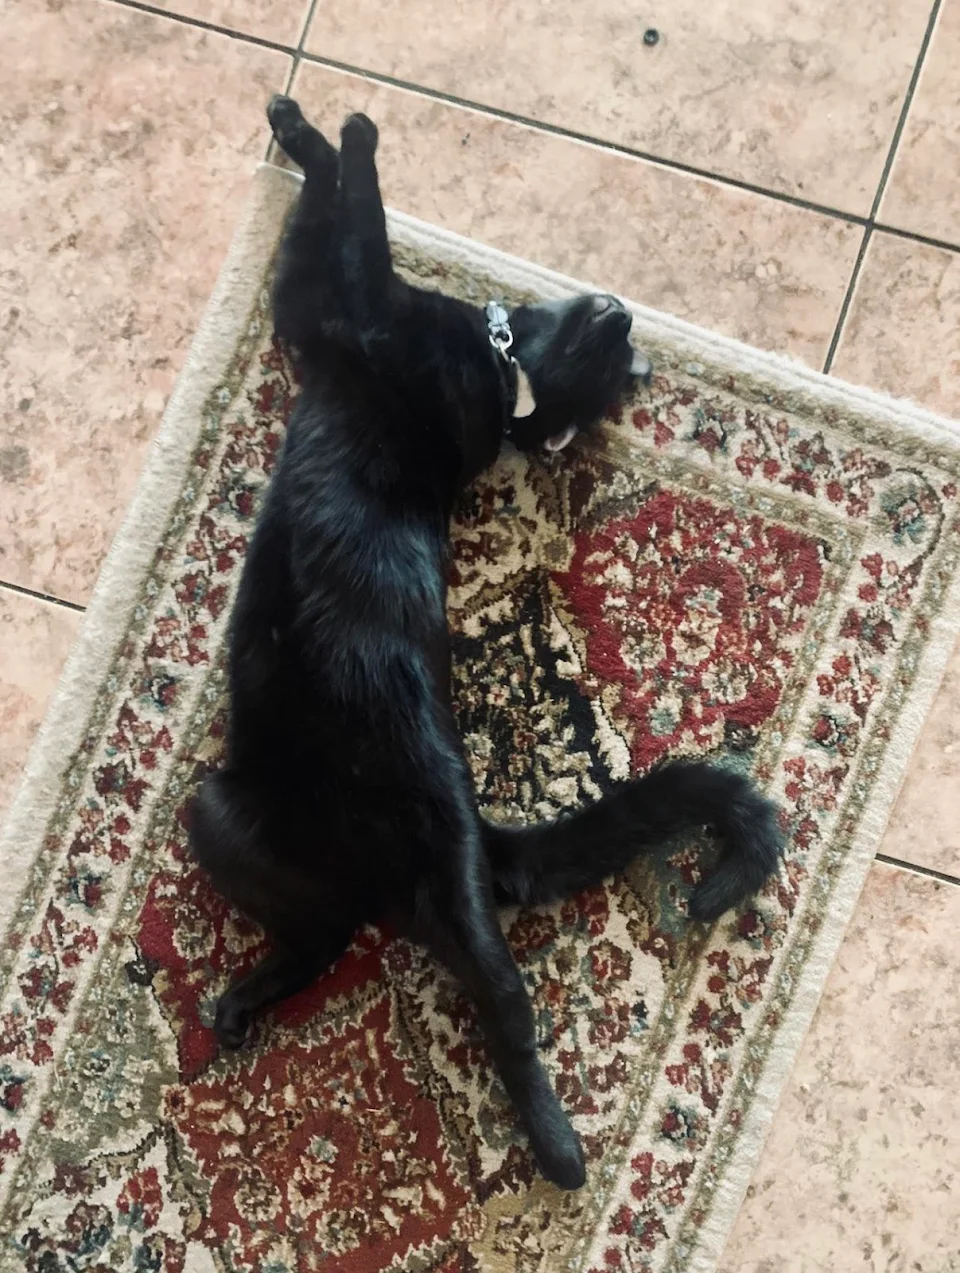 This cat stretching on a carpet